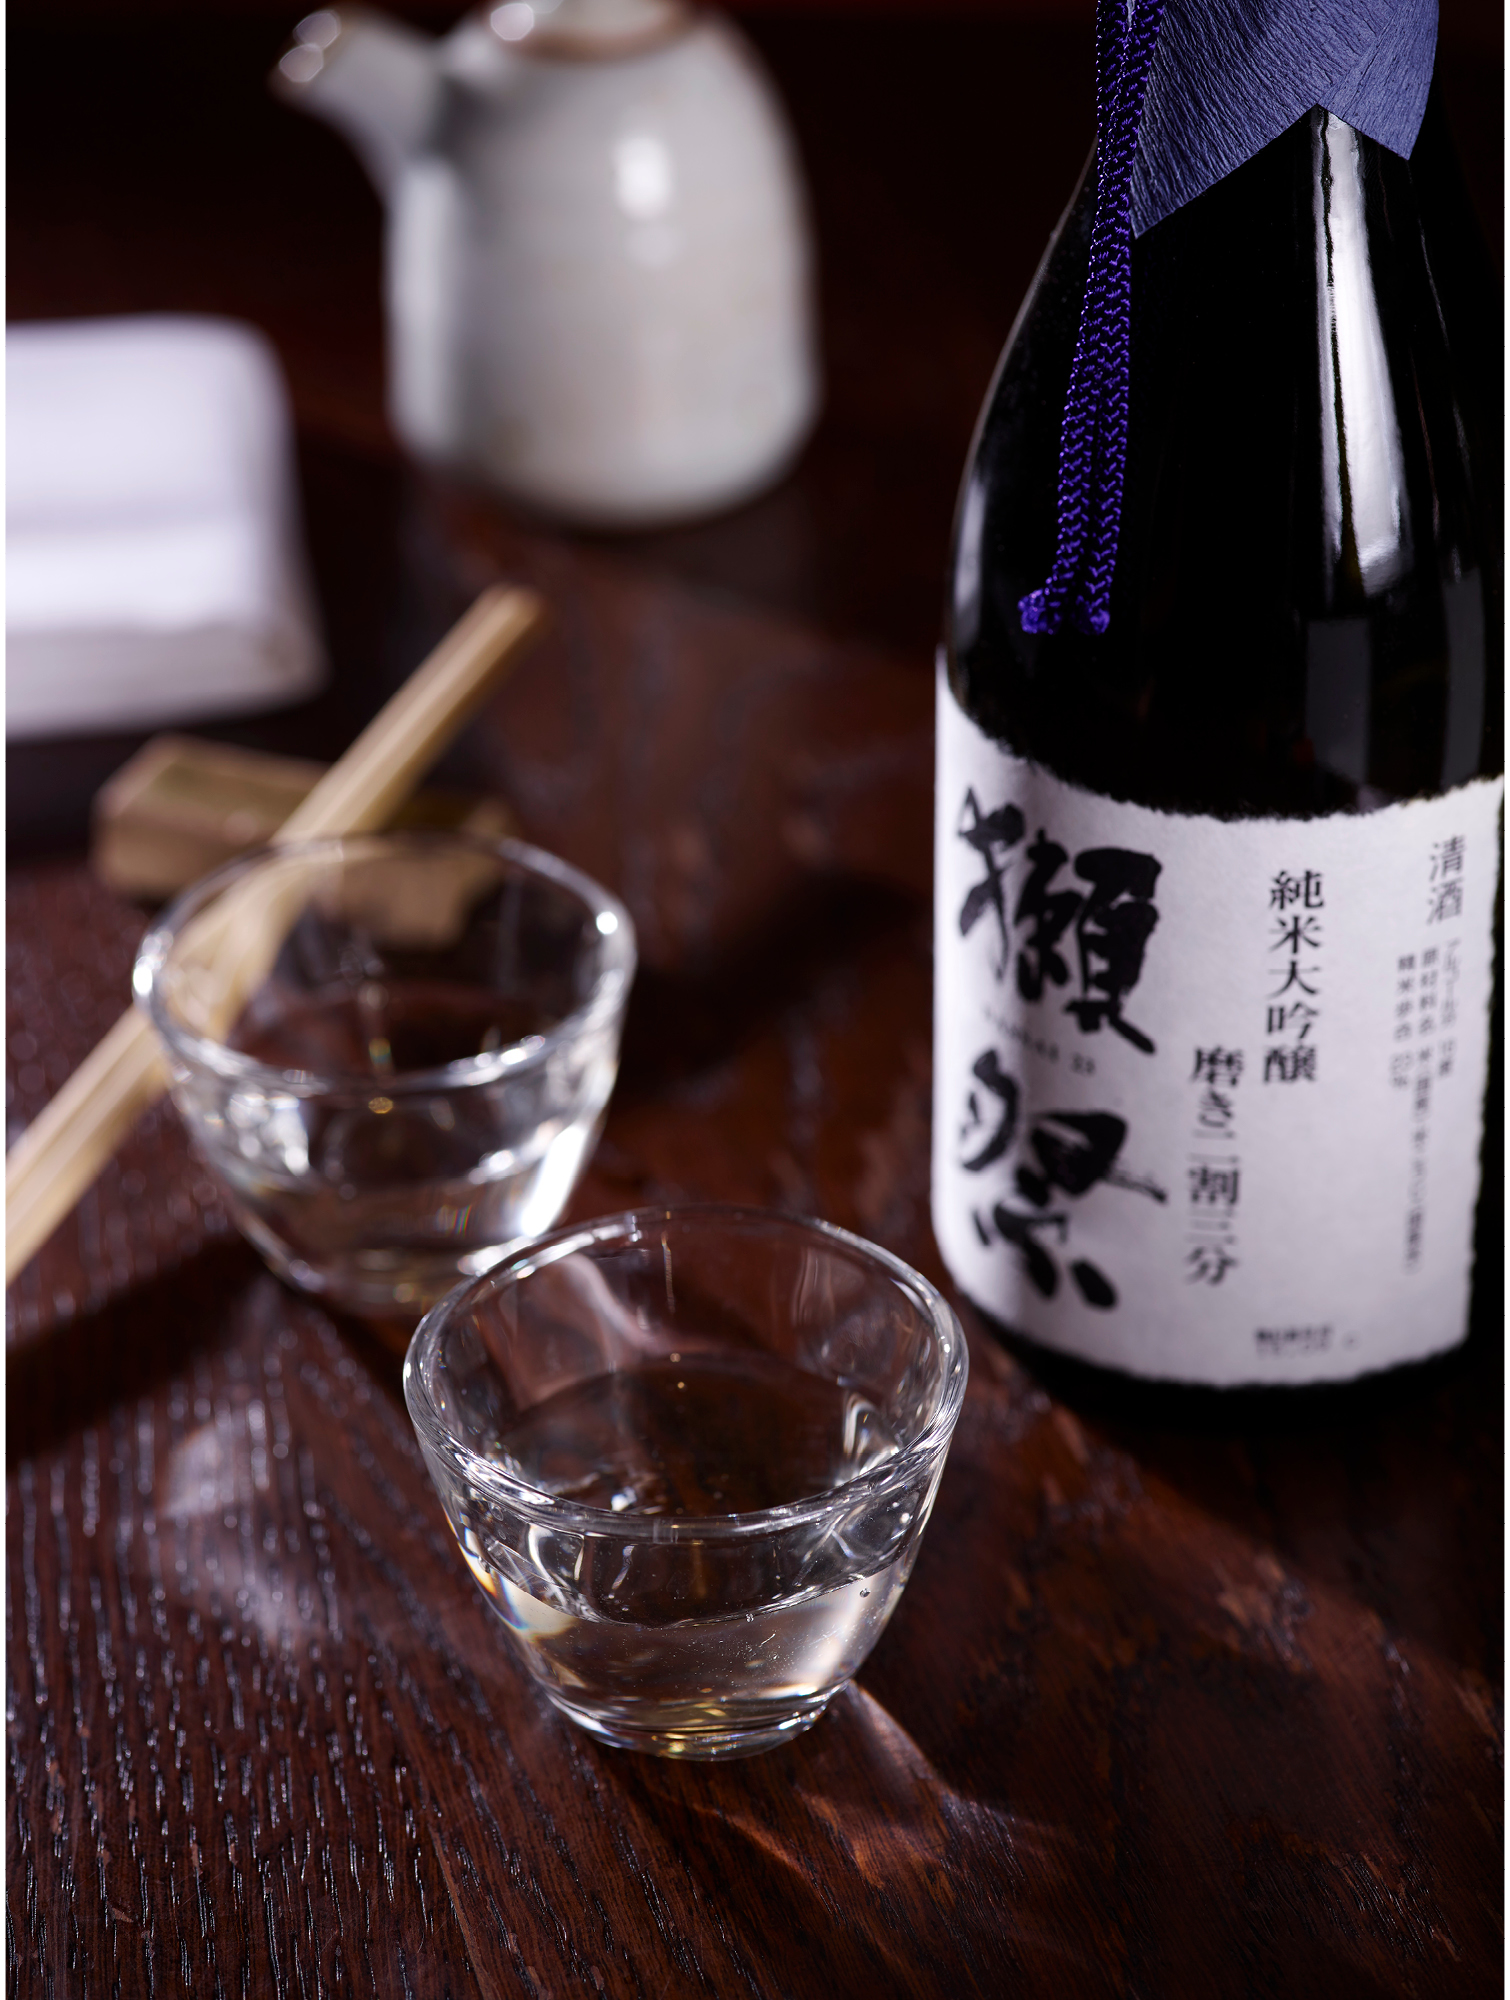 Roka is launching a sake and special menu to celebrate its 15th anniversary